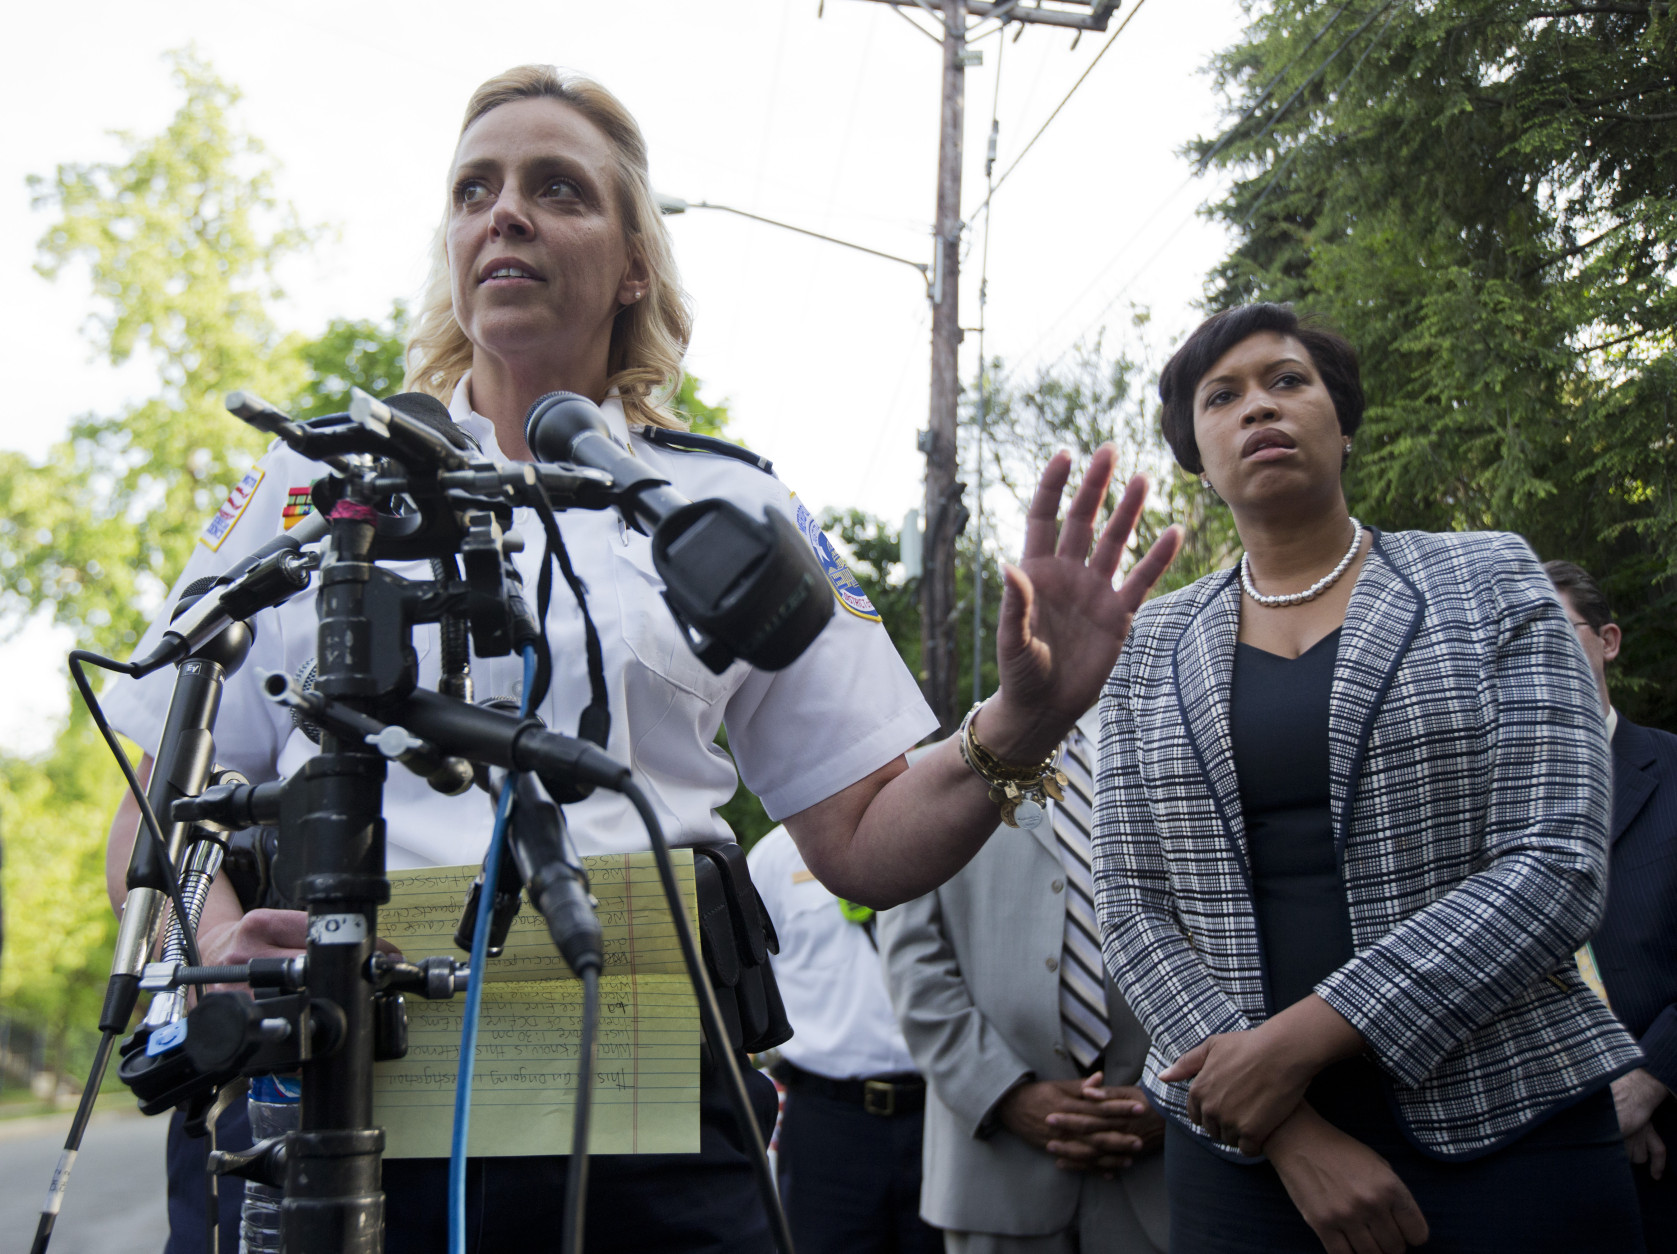 District of Columbia Police Chief Cathy Lanier, left, with Mayor Muriel Bowser, talks to reporters about a fire at a home in Northwest Washington, Thursday, May 14, 2015, where four people were found dead after firefighters entered a home in an upscale Washington neighborhood.  (AP Photo/Manuel Balce Ceneta)